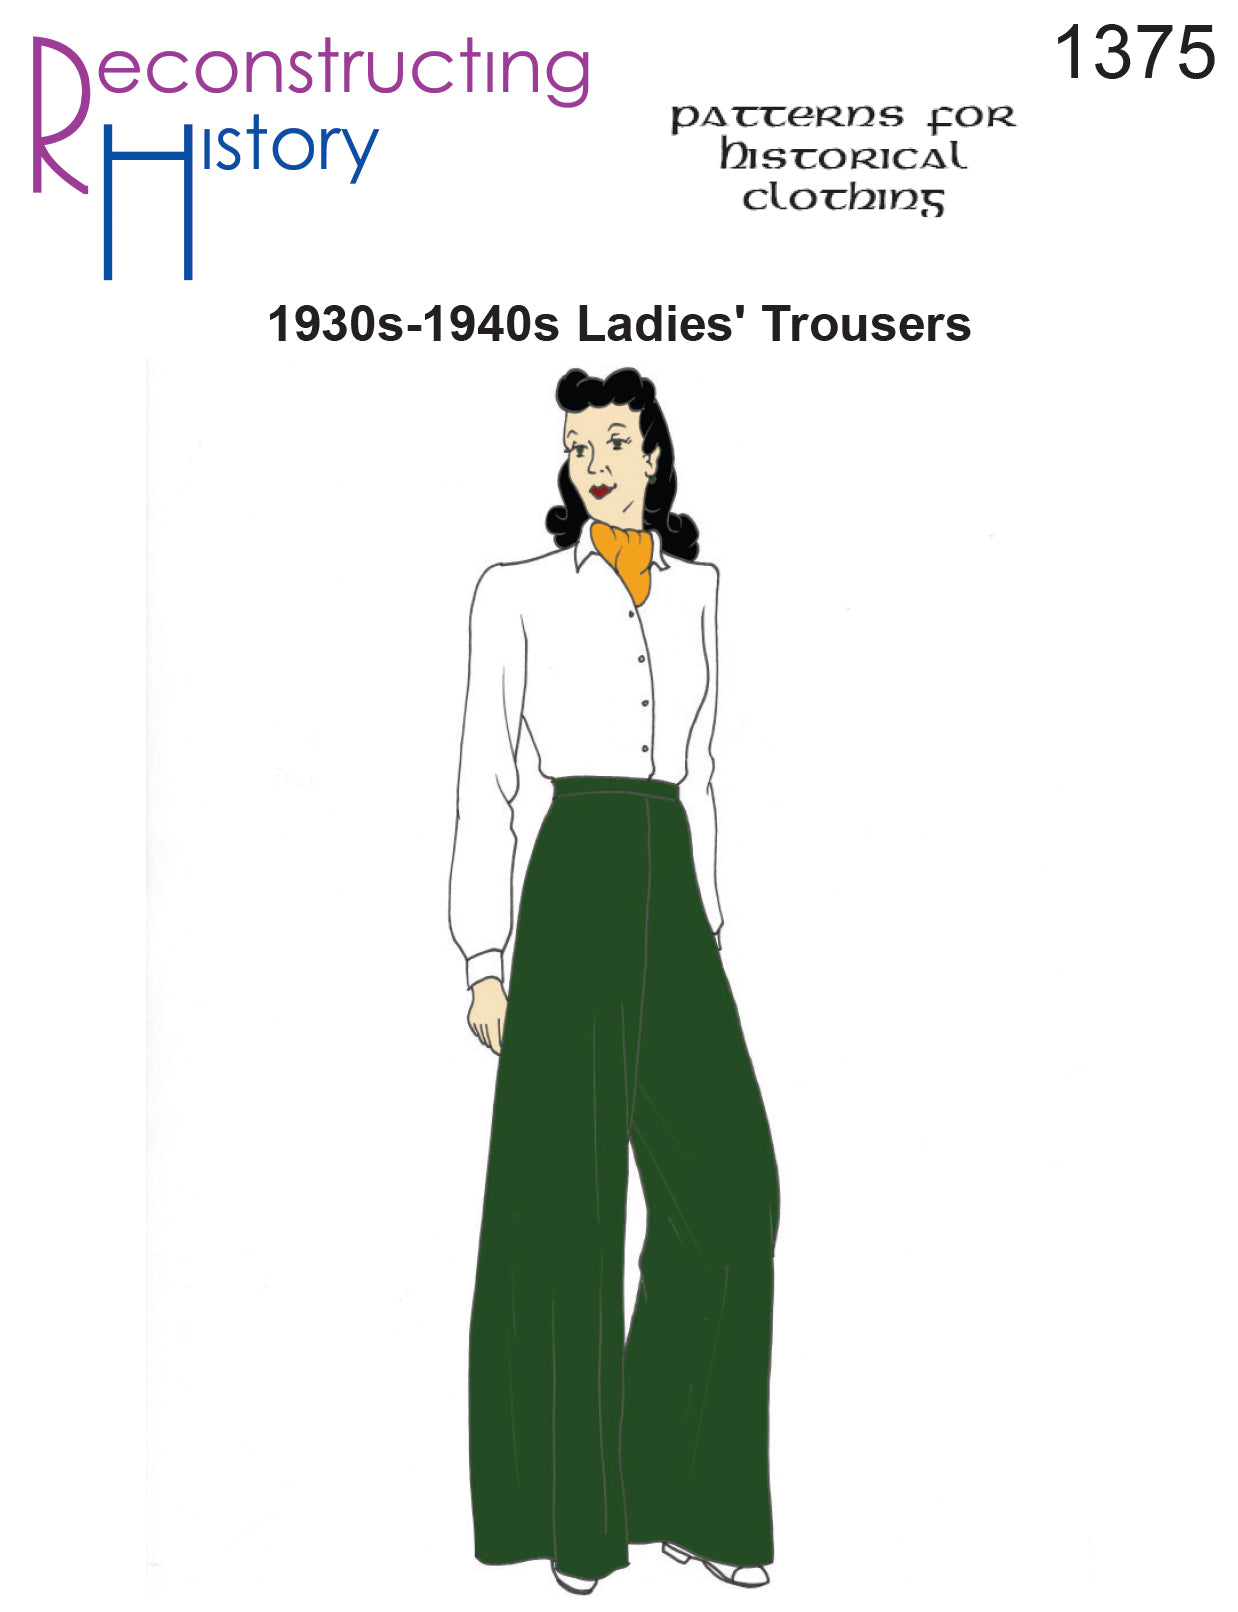 Vintage Fashion: Women's Pants Styles from the 1930s and 1940s